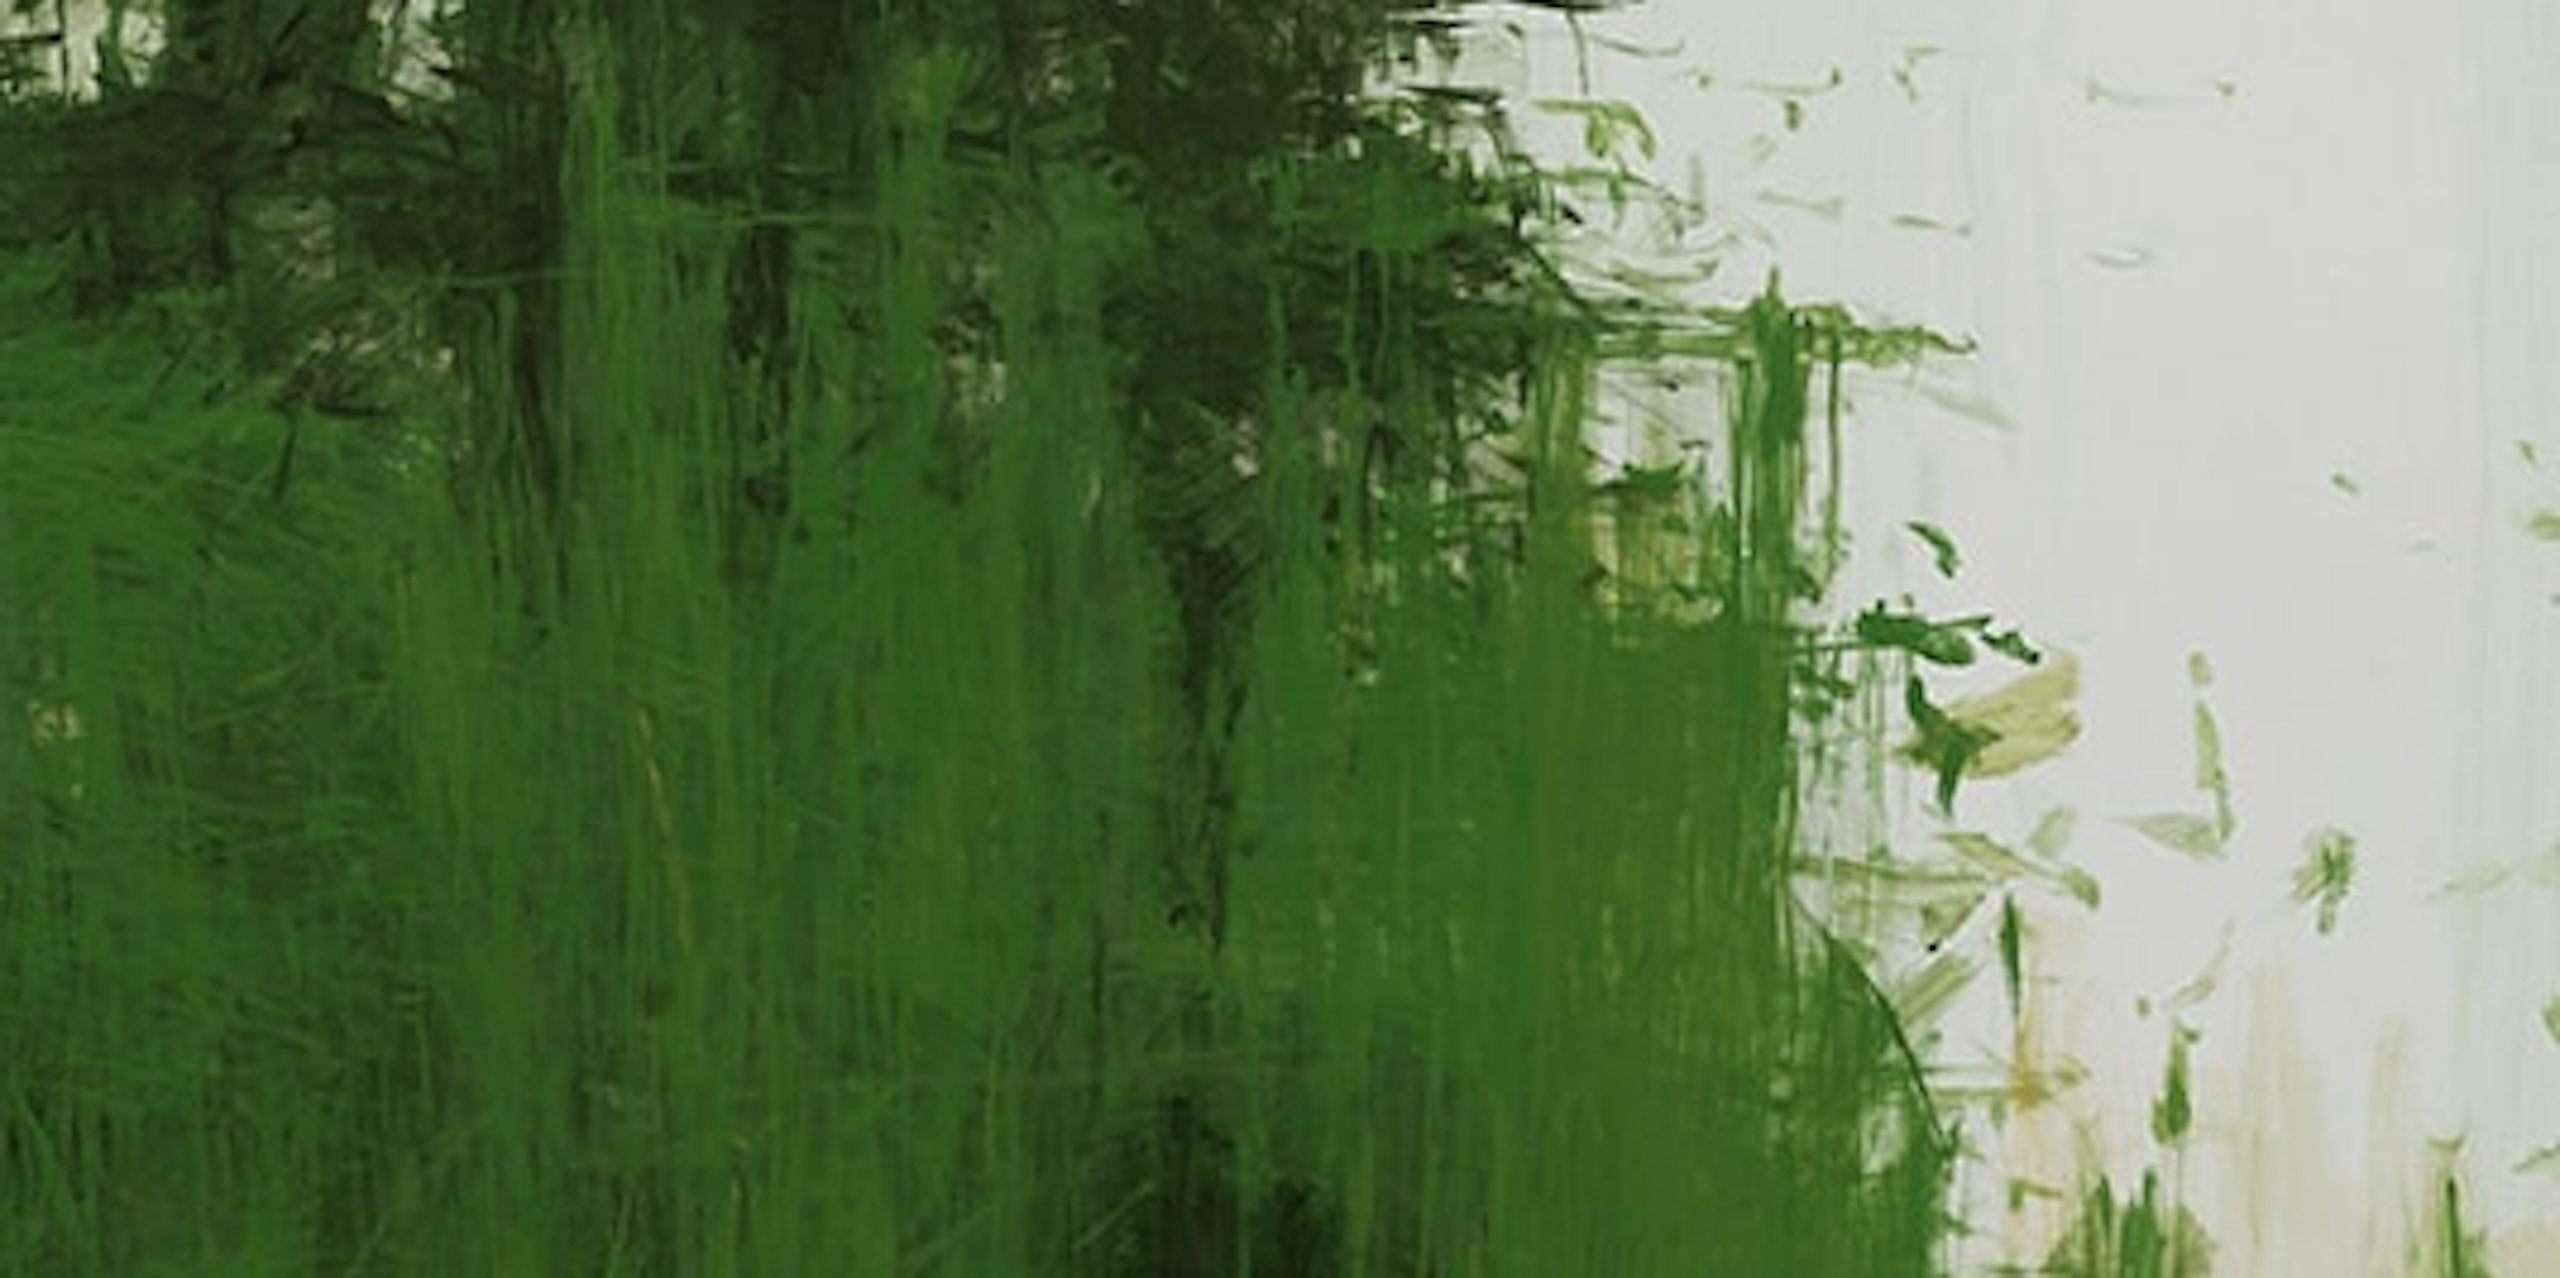 Green Iron Jungles N1 by Calo Carratalá - Round painting, landscape, green For Sale 4